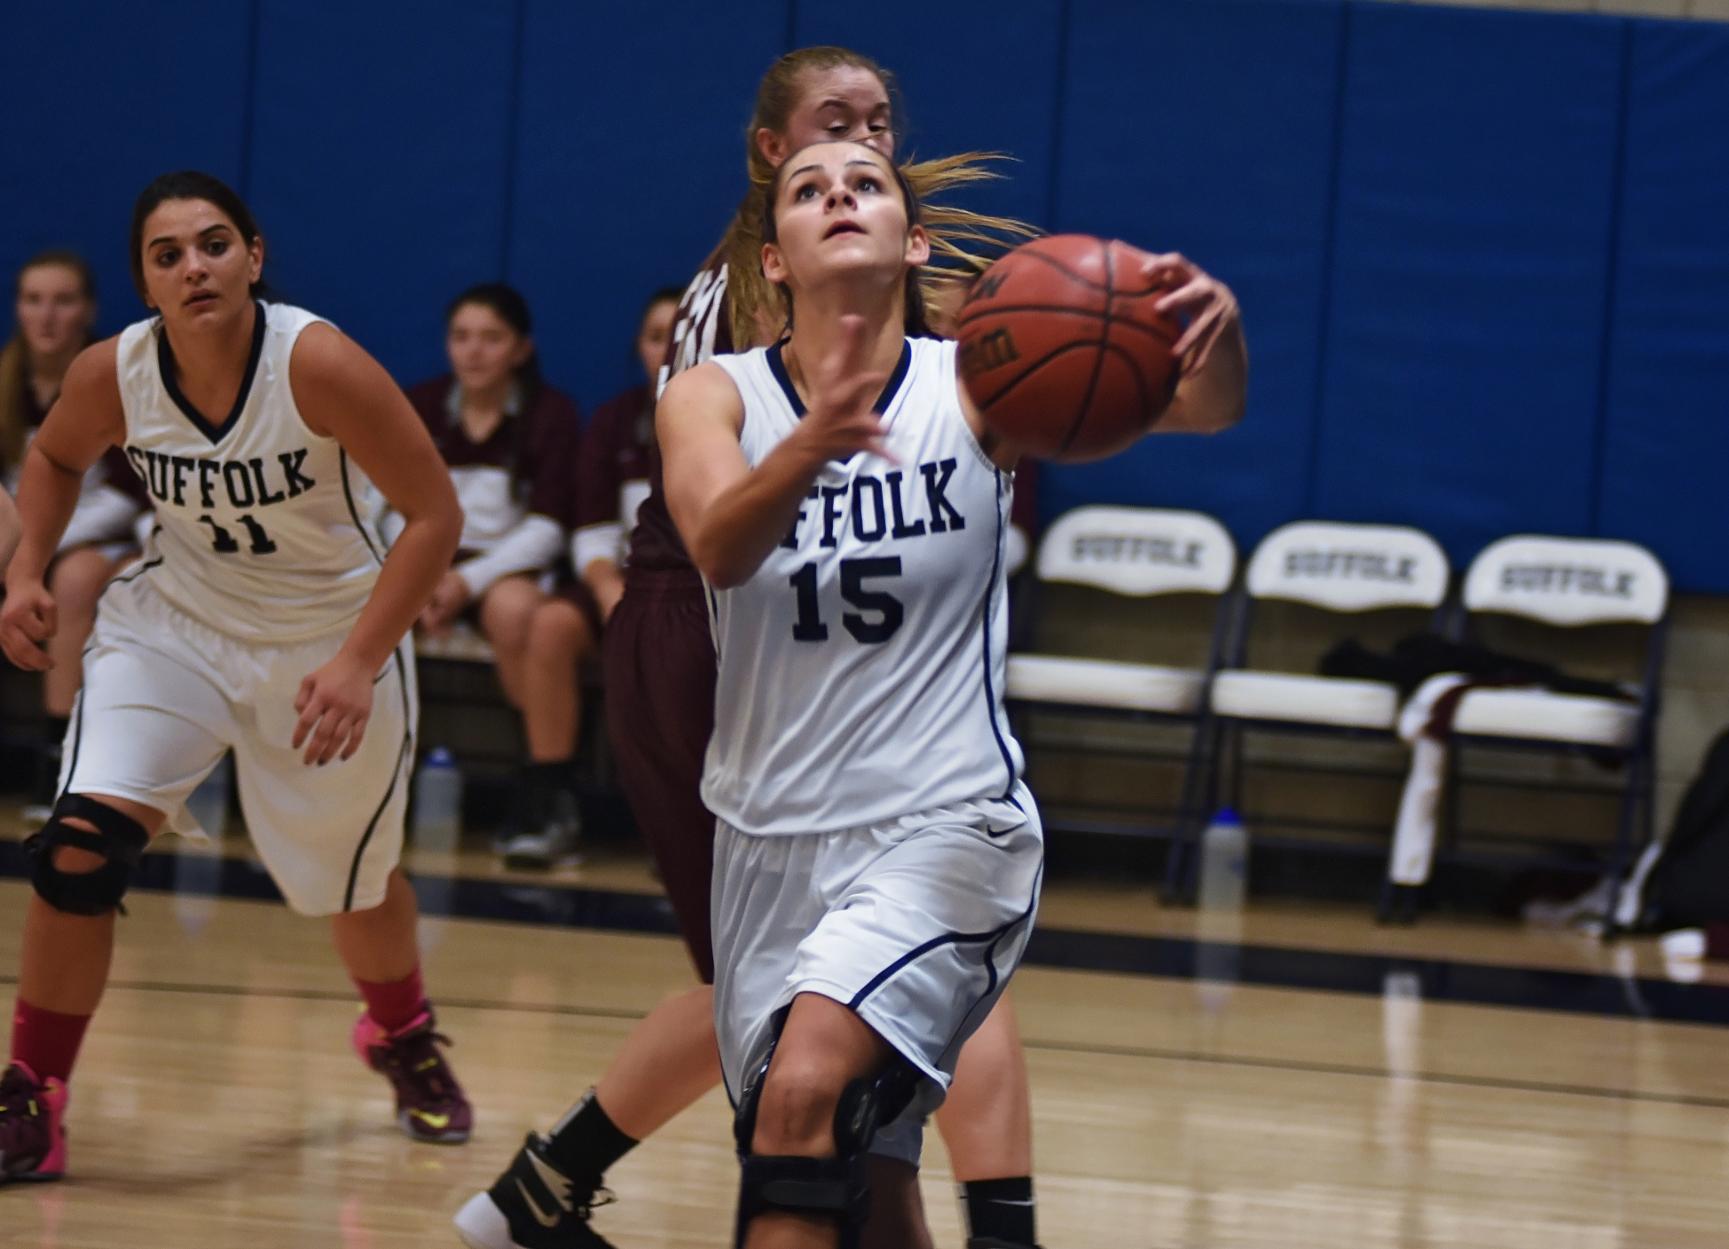 Women’s Basketball Handles Simmons, 81-50, at Emerson Tip-Off Tourney